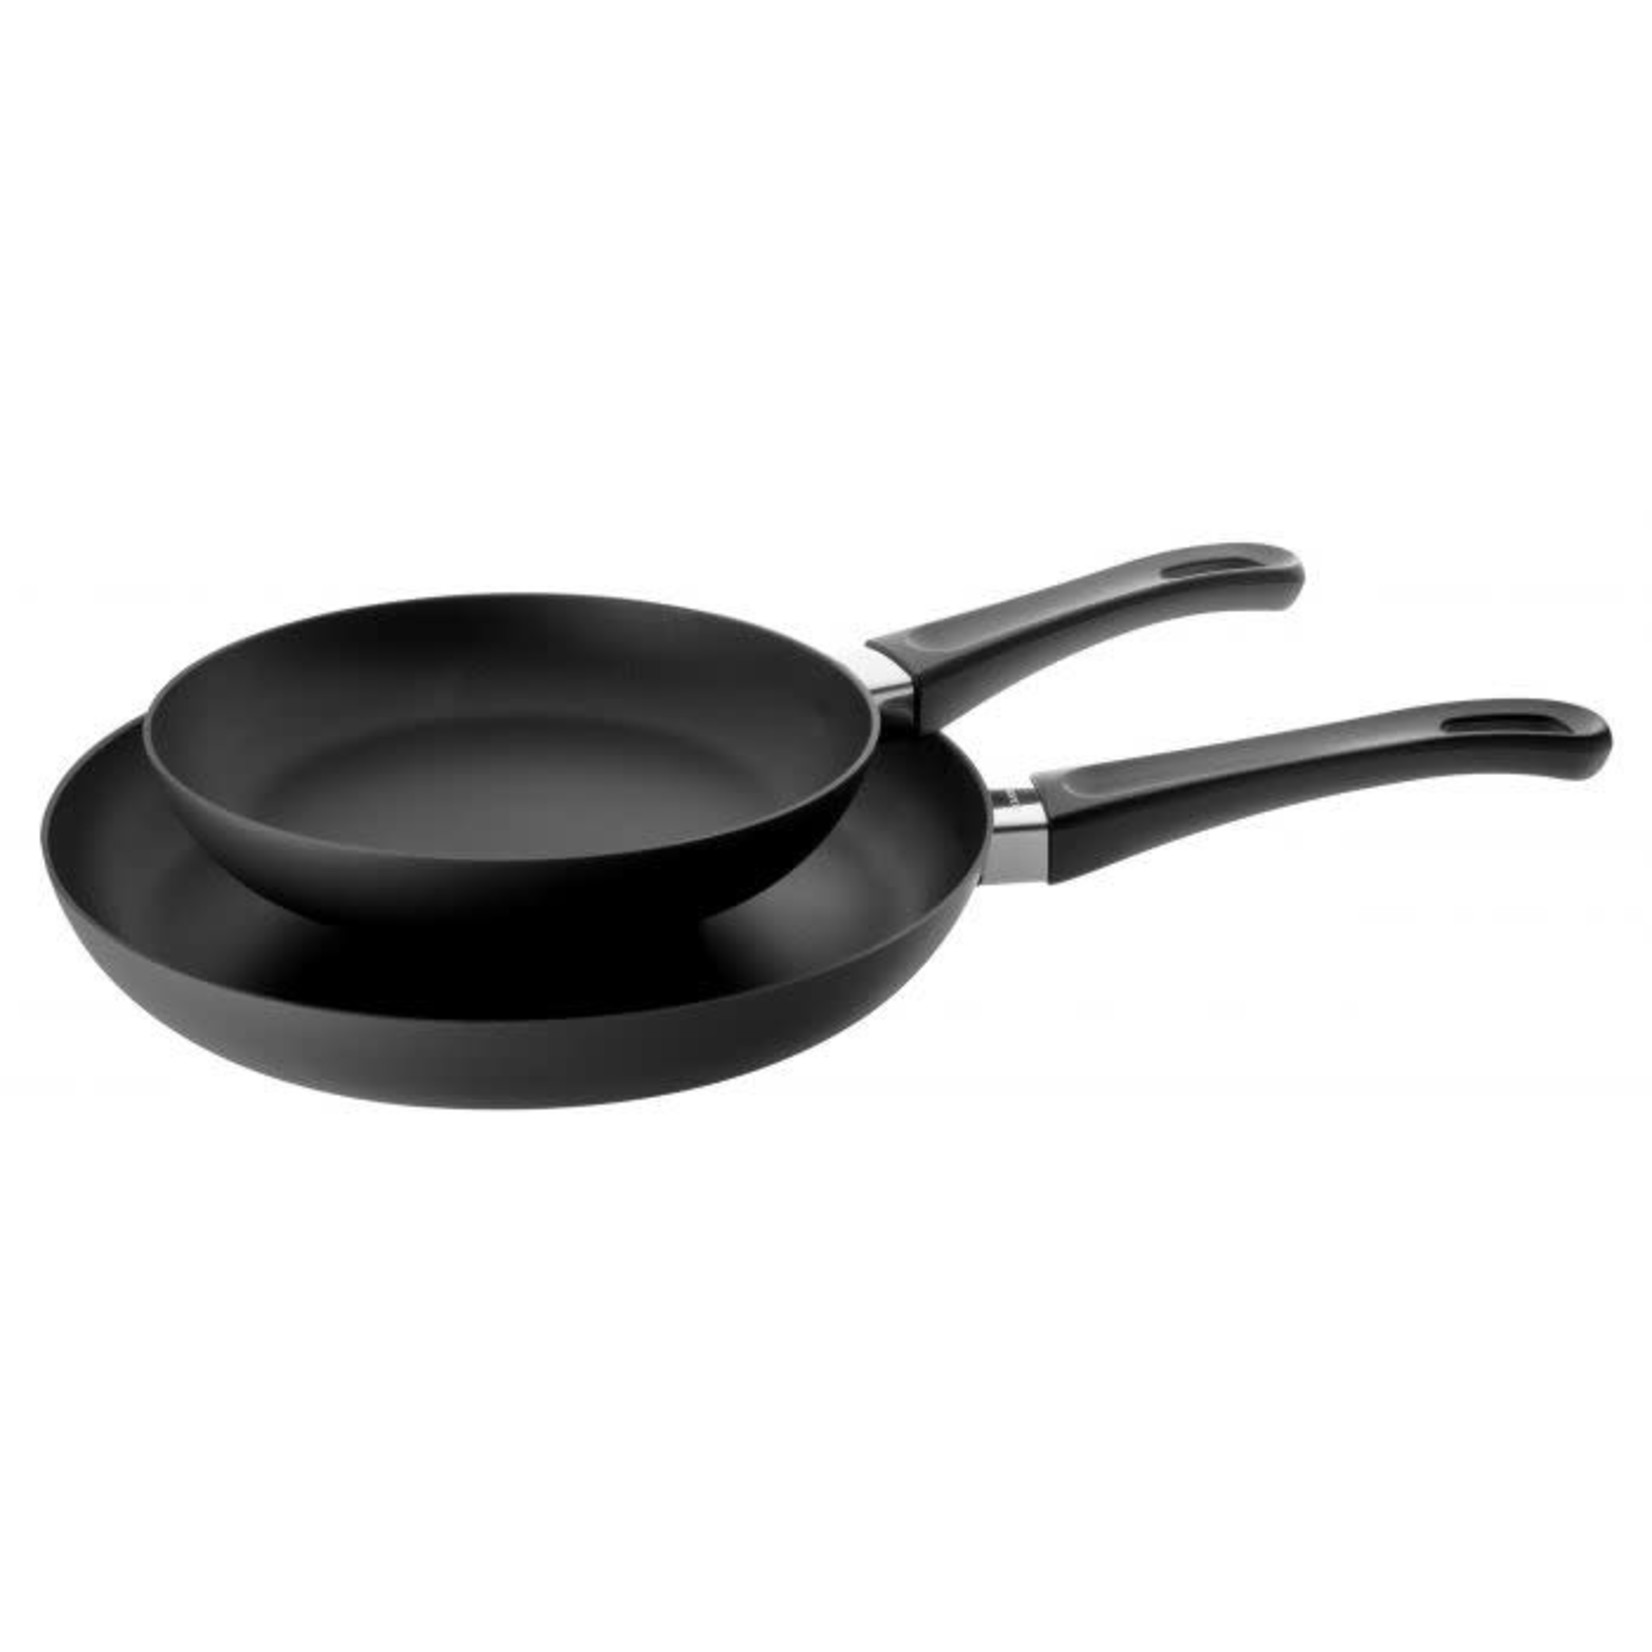 SCANPAN 2pc Fry 8" and 10.25" Classic